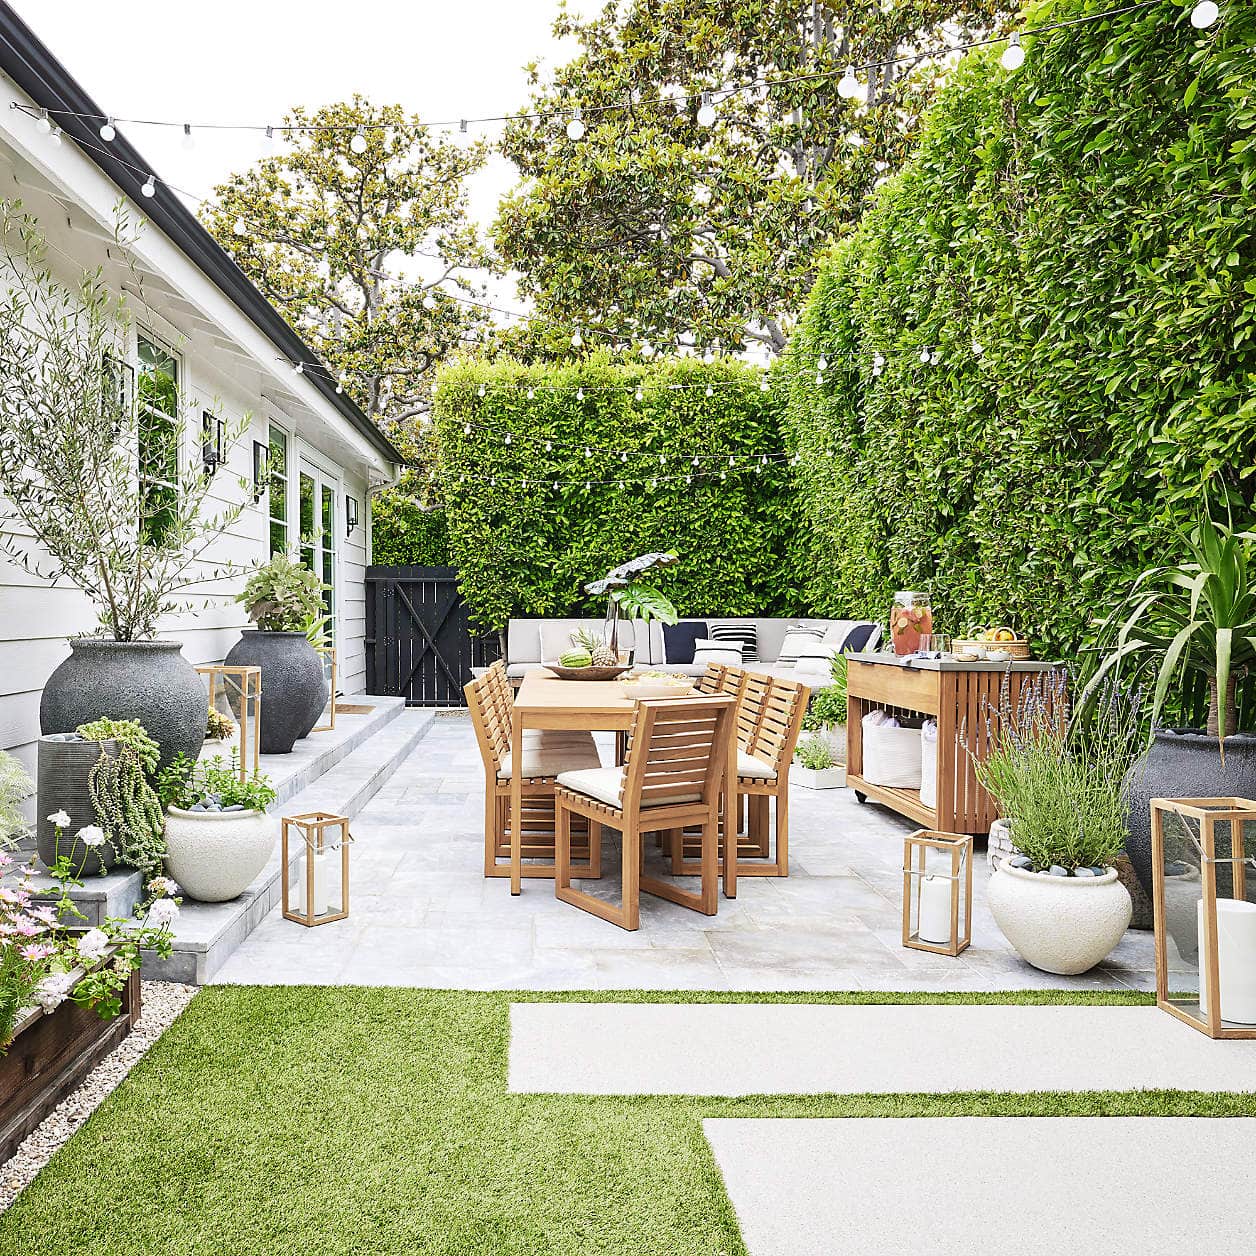 Designing Small Backyard Spaces